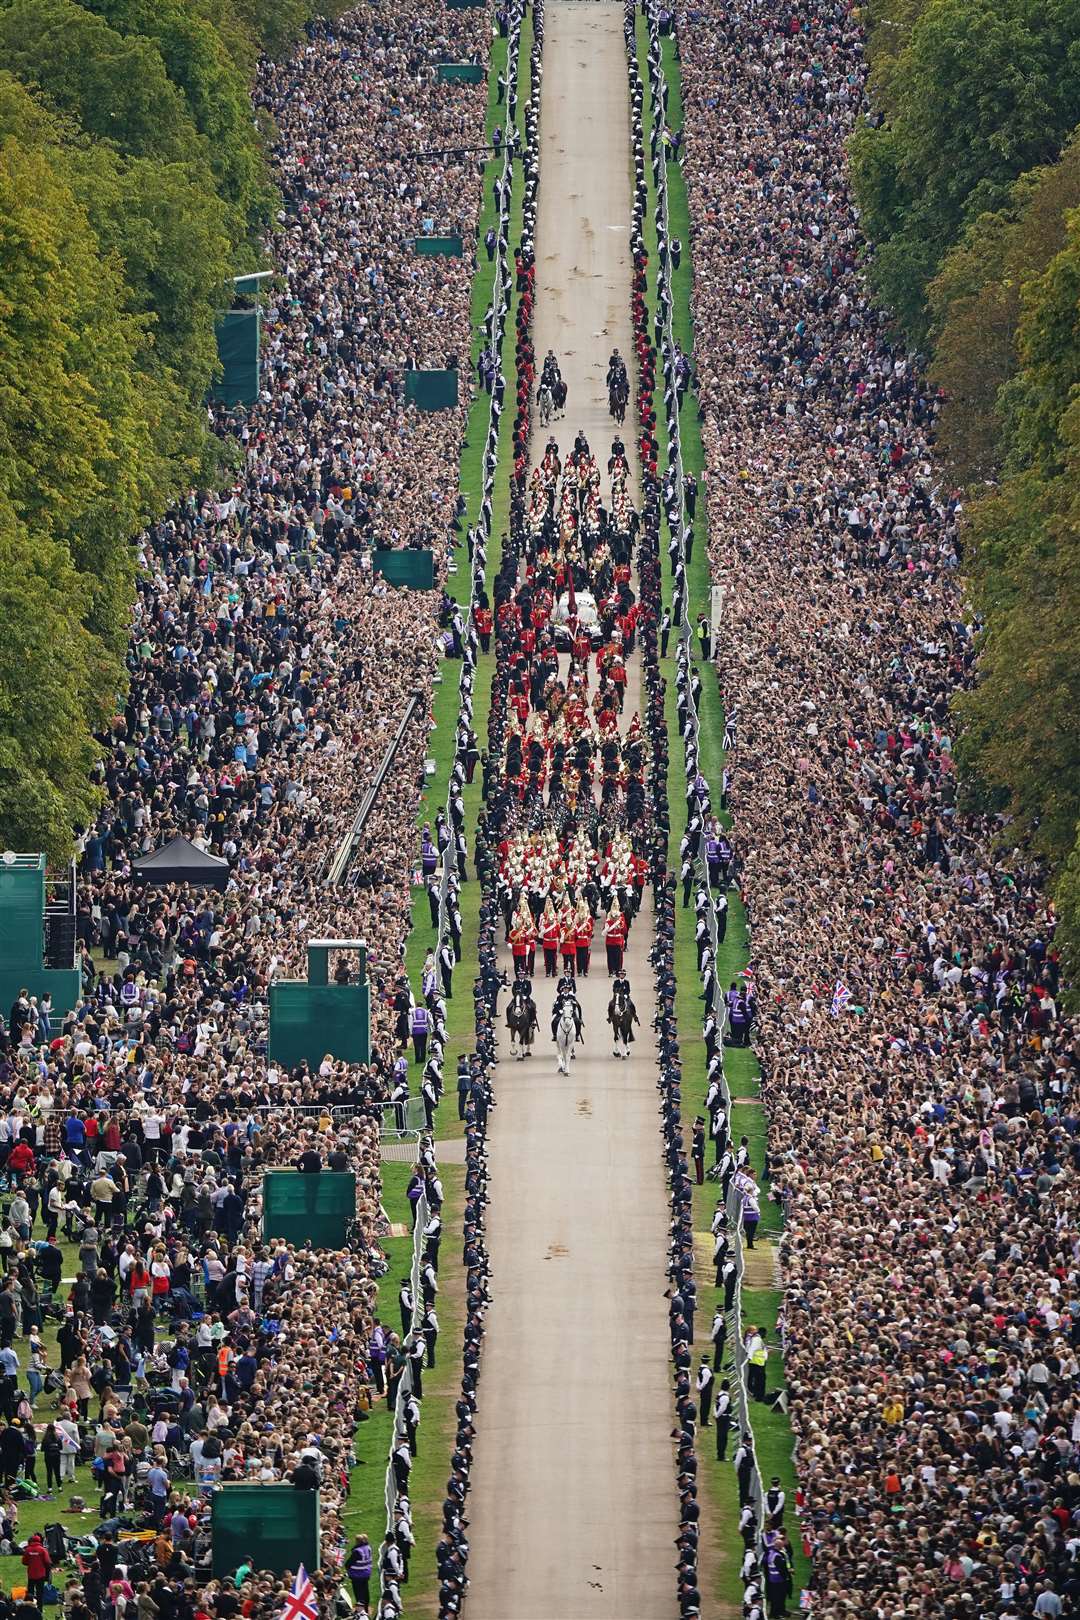 Thousands line The Long Walk at Winsor to watch the ceremonial procession towards Windsor Castle (Aaron Chown/PA)